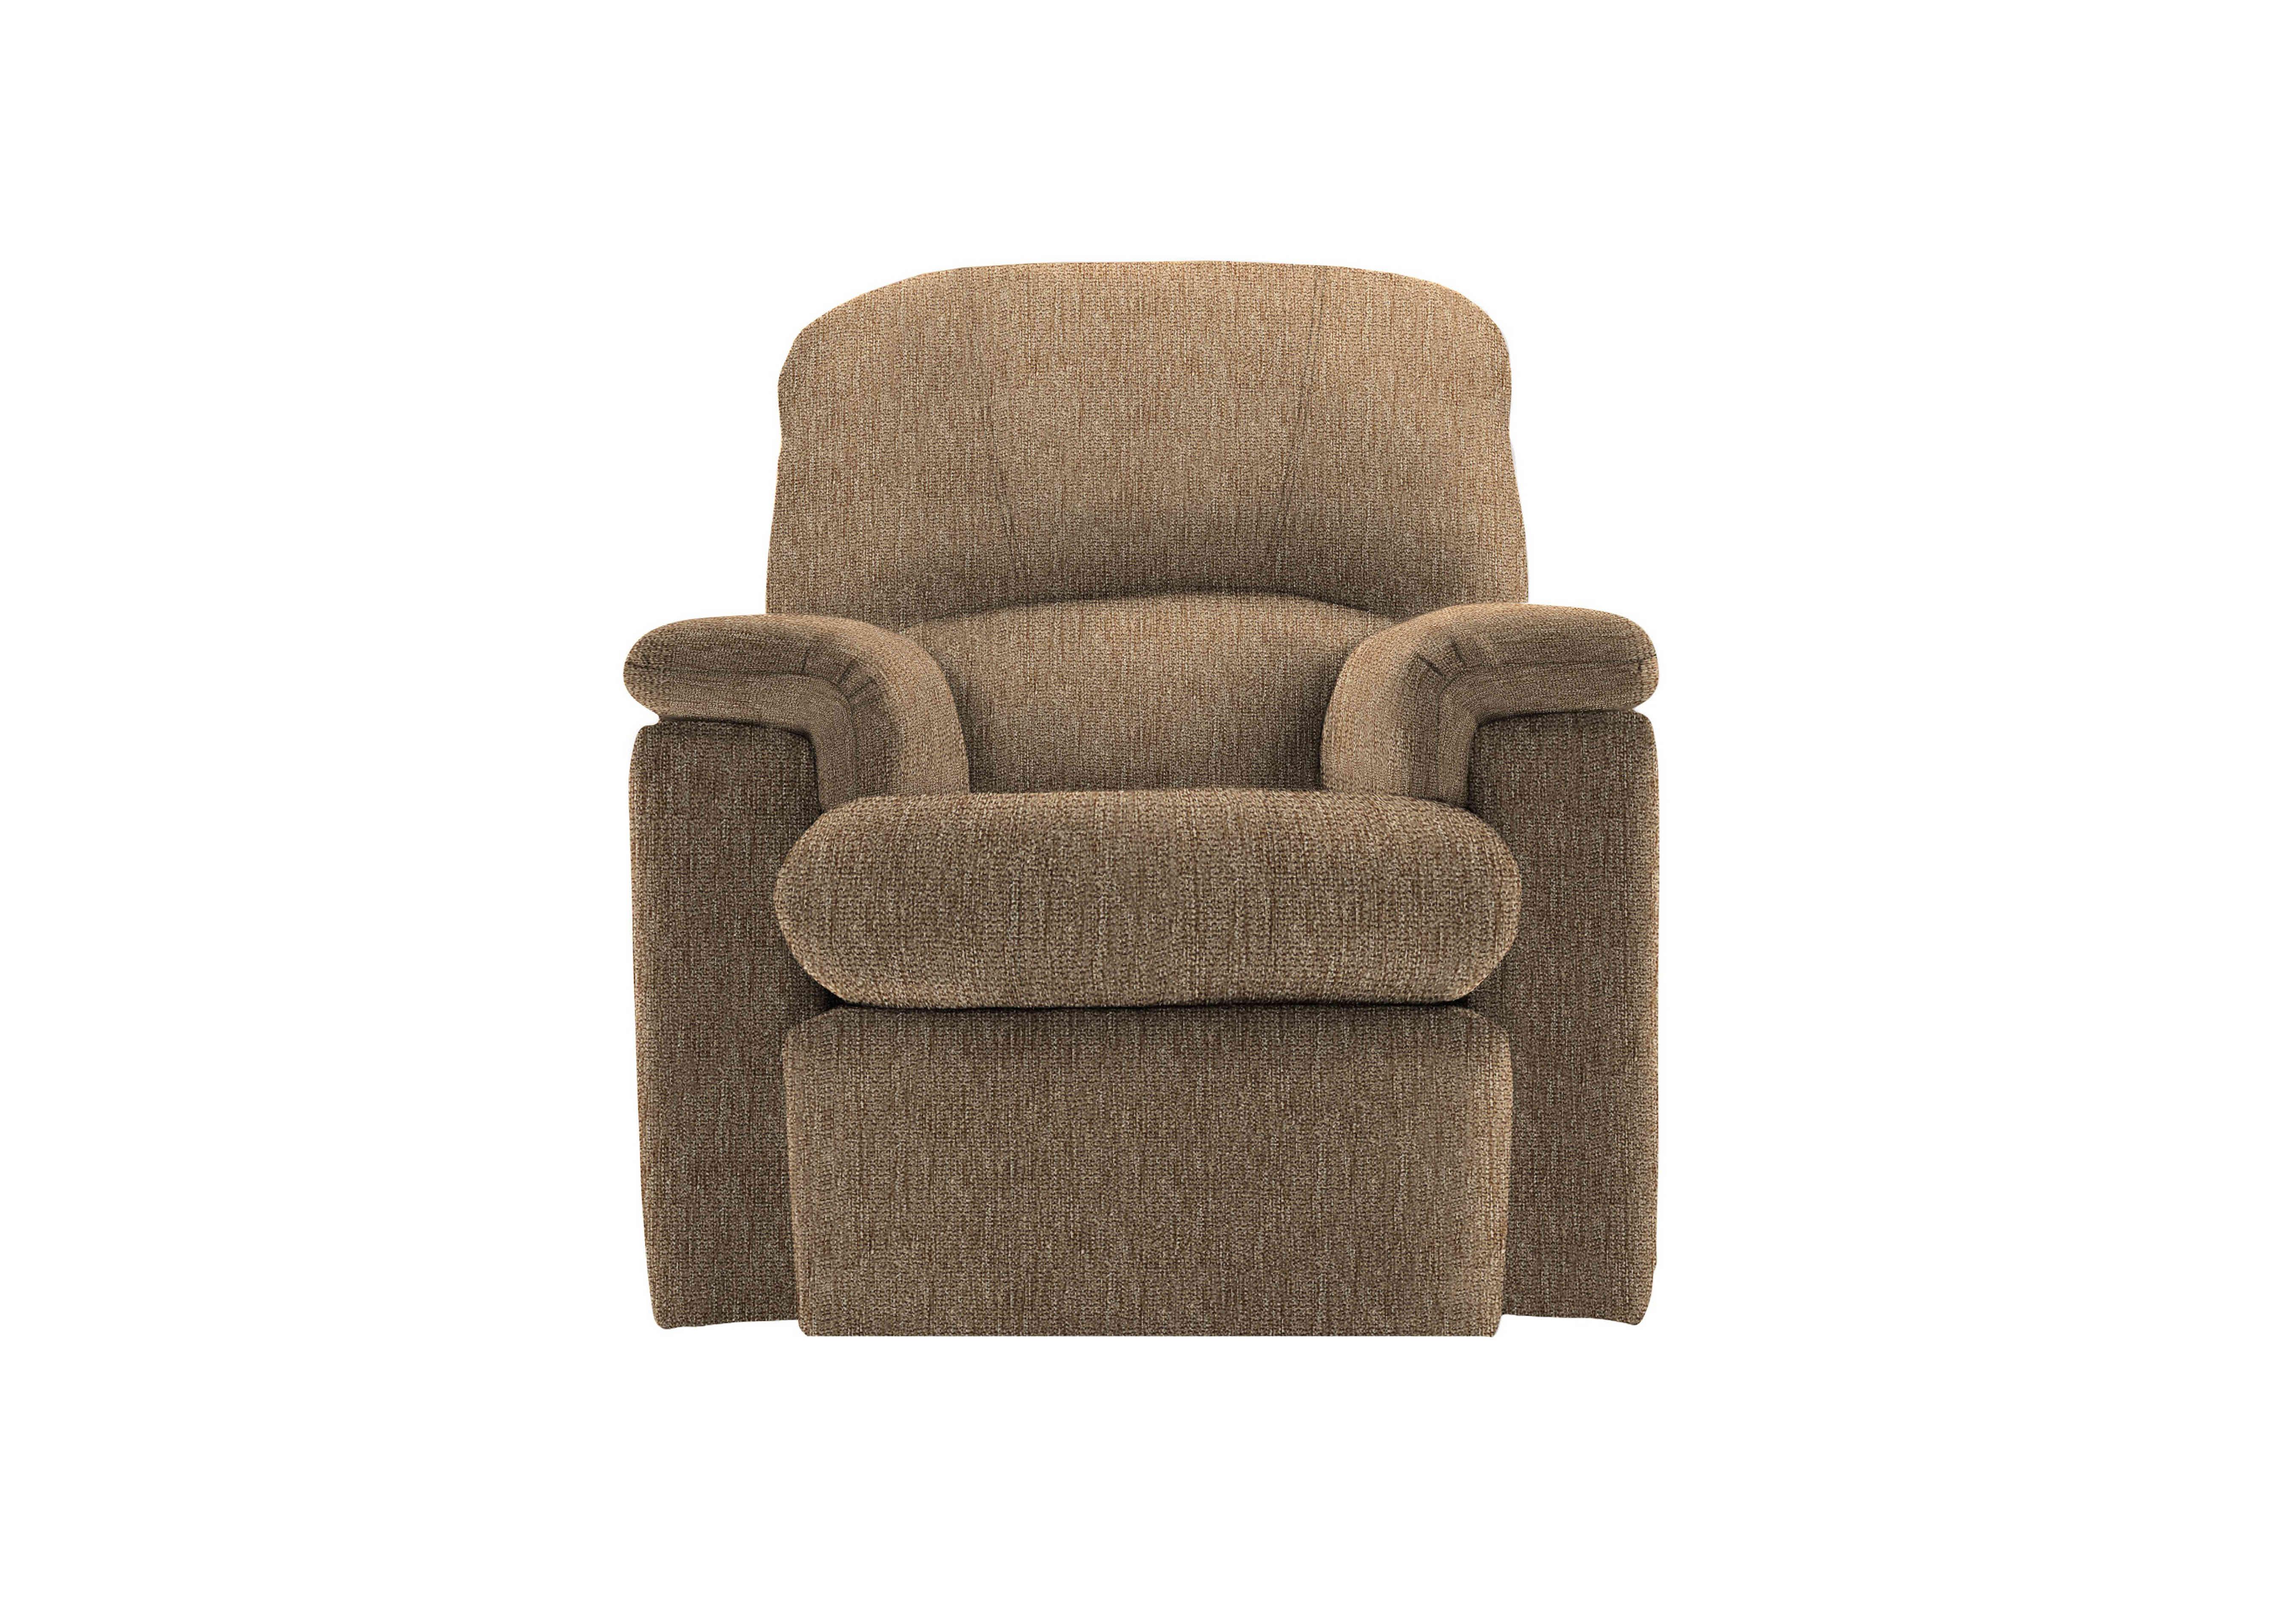 Chloe Small Fabric Armchair in A070 Boucle Cocoa on Furniture Village